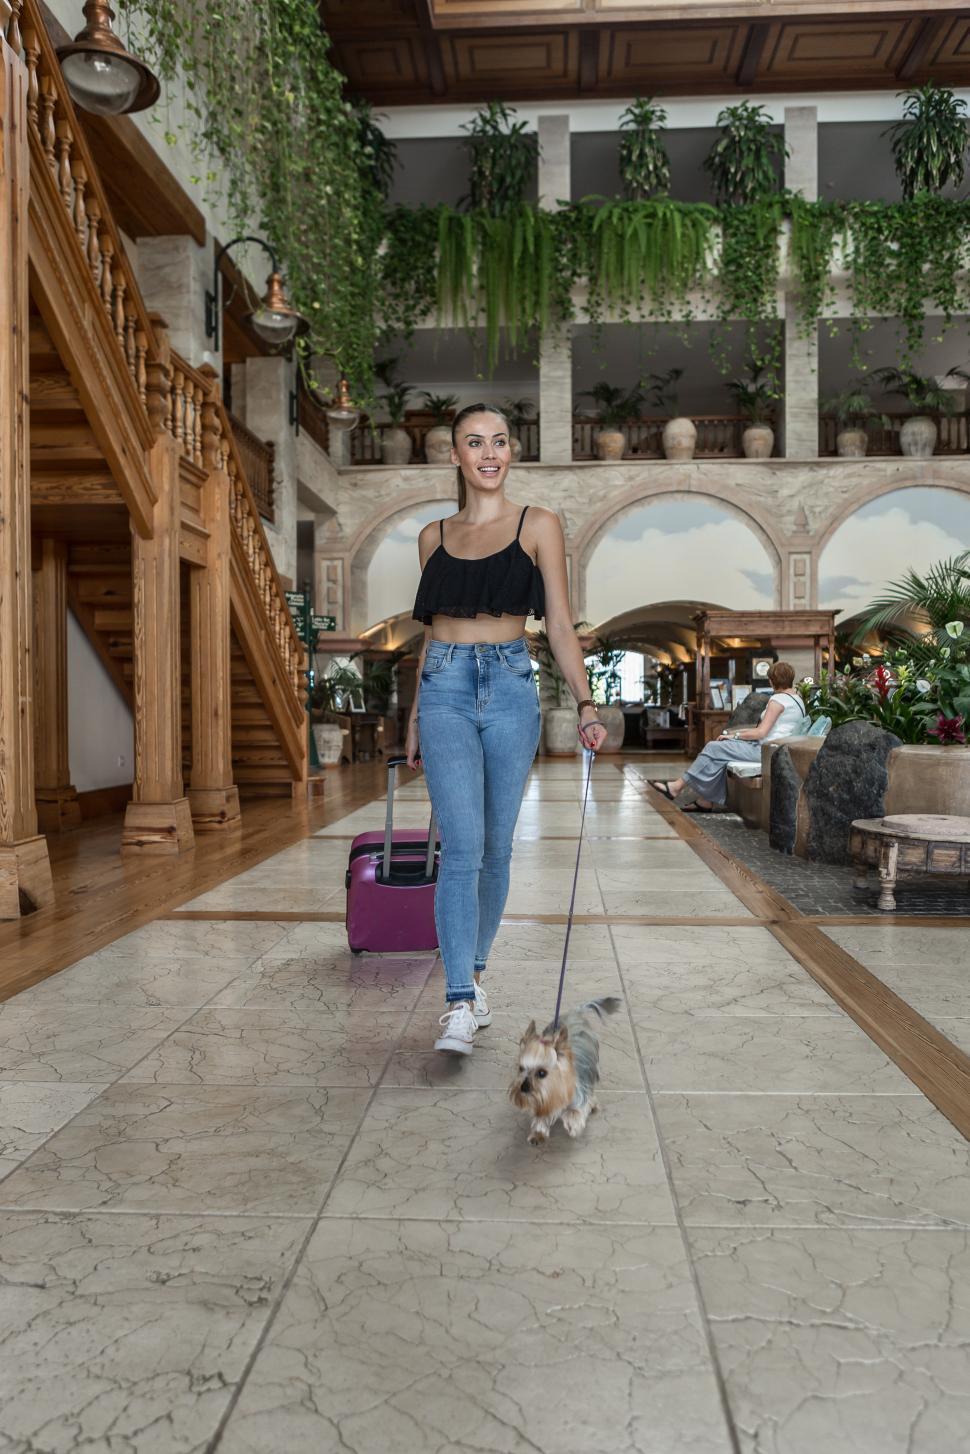 Download Free Stock Photo of Female traveler with dog walking in hotel 